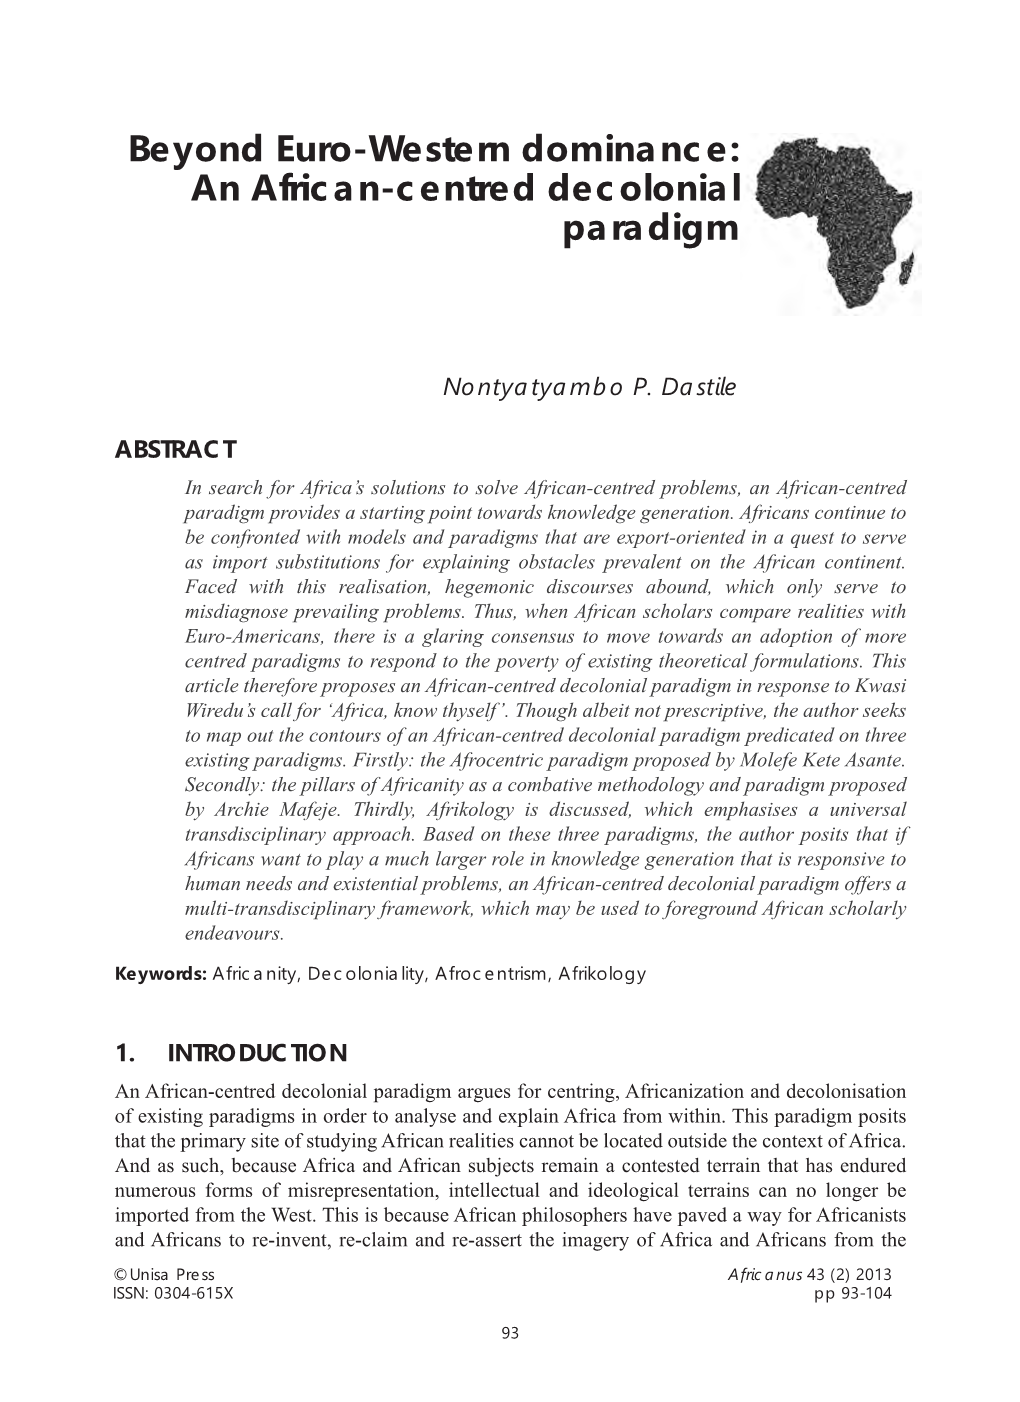 Beyond Euro-Western Dominance: an African-Centred Decolonial Paradigm